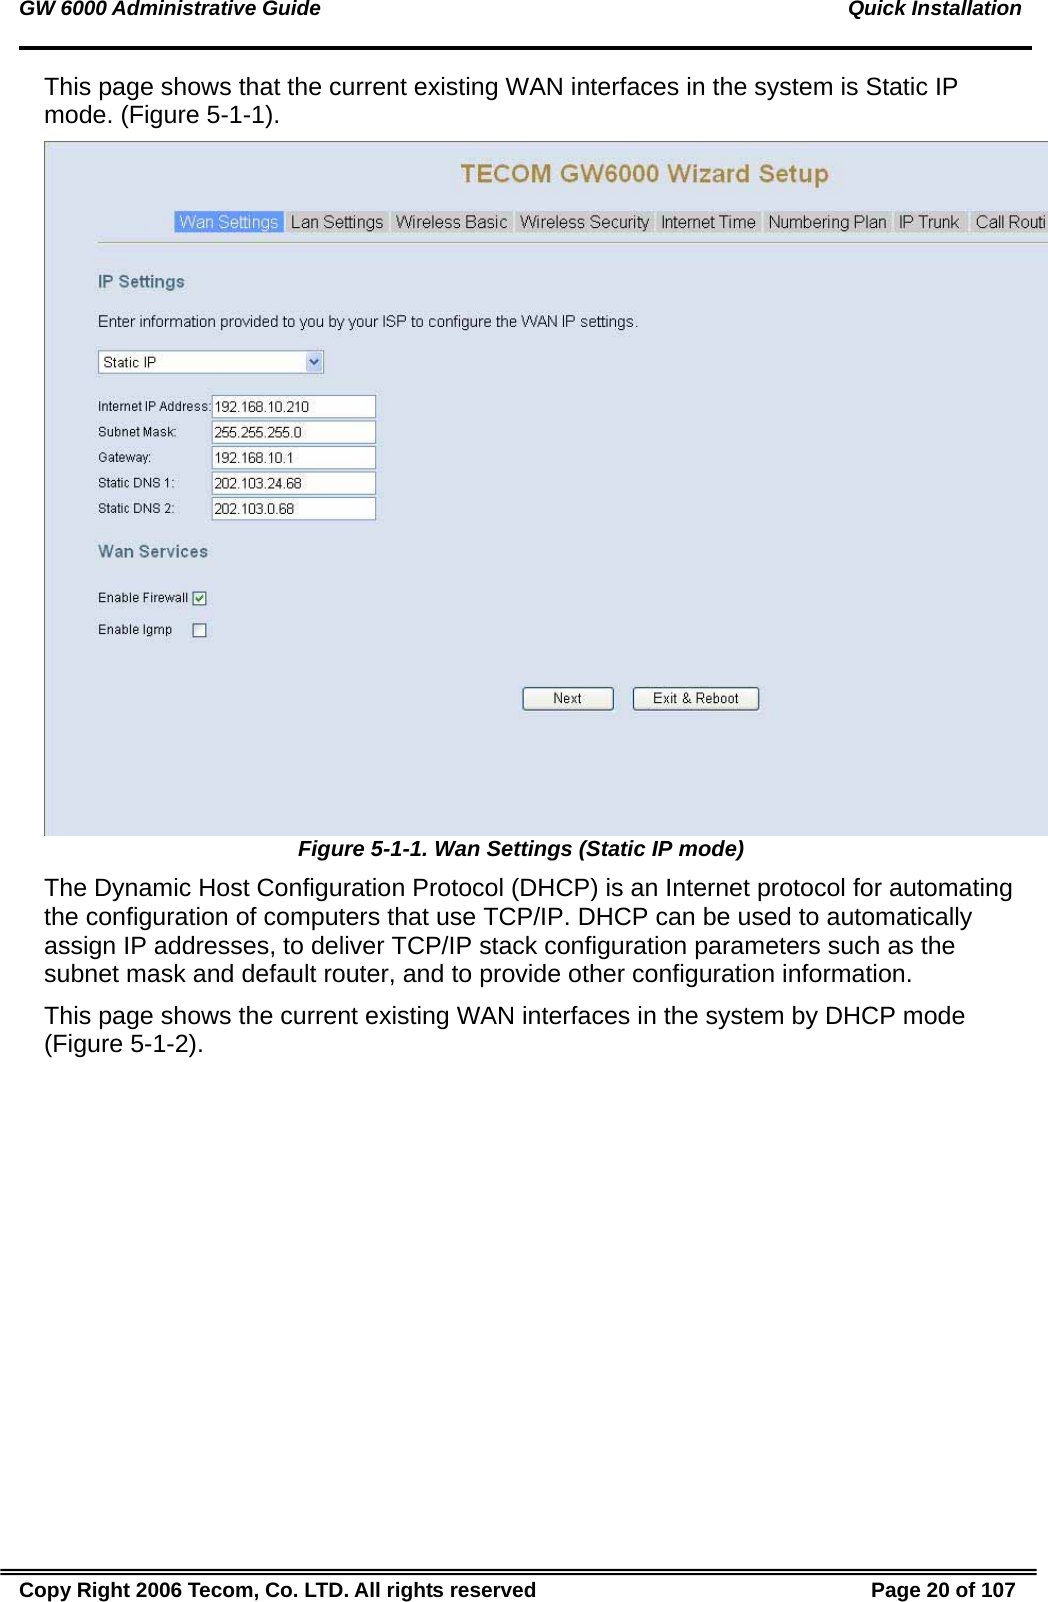 GW 6000 Administrative Guide                                                                                           Quick Installation This page shows that the current existing WAN interfaces in the system is Static IP mode. (Figure 5-1-1).  Figure 5-1-1. Wan Settings (Static IP mode) The Dynamic Host Configuration Protocol (DHCP) is an Internet protocol for automating the configuration of computers that use TCP/IP. DHCP can be used to automatically assign IP addresses, to deliver TCP/IP stack configuration parameters such as the subnet mask and default router, and to provide other configuration information. This page shows the current existing WAN interfaces in the system by DHCP mode (Figure 5-1-2). Copy Right 2006 Tecom, Co. LTD. All rights reserved  Page 20 of 107 